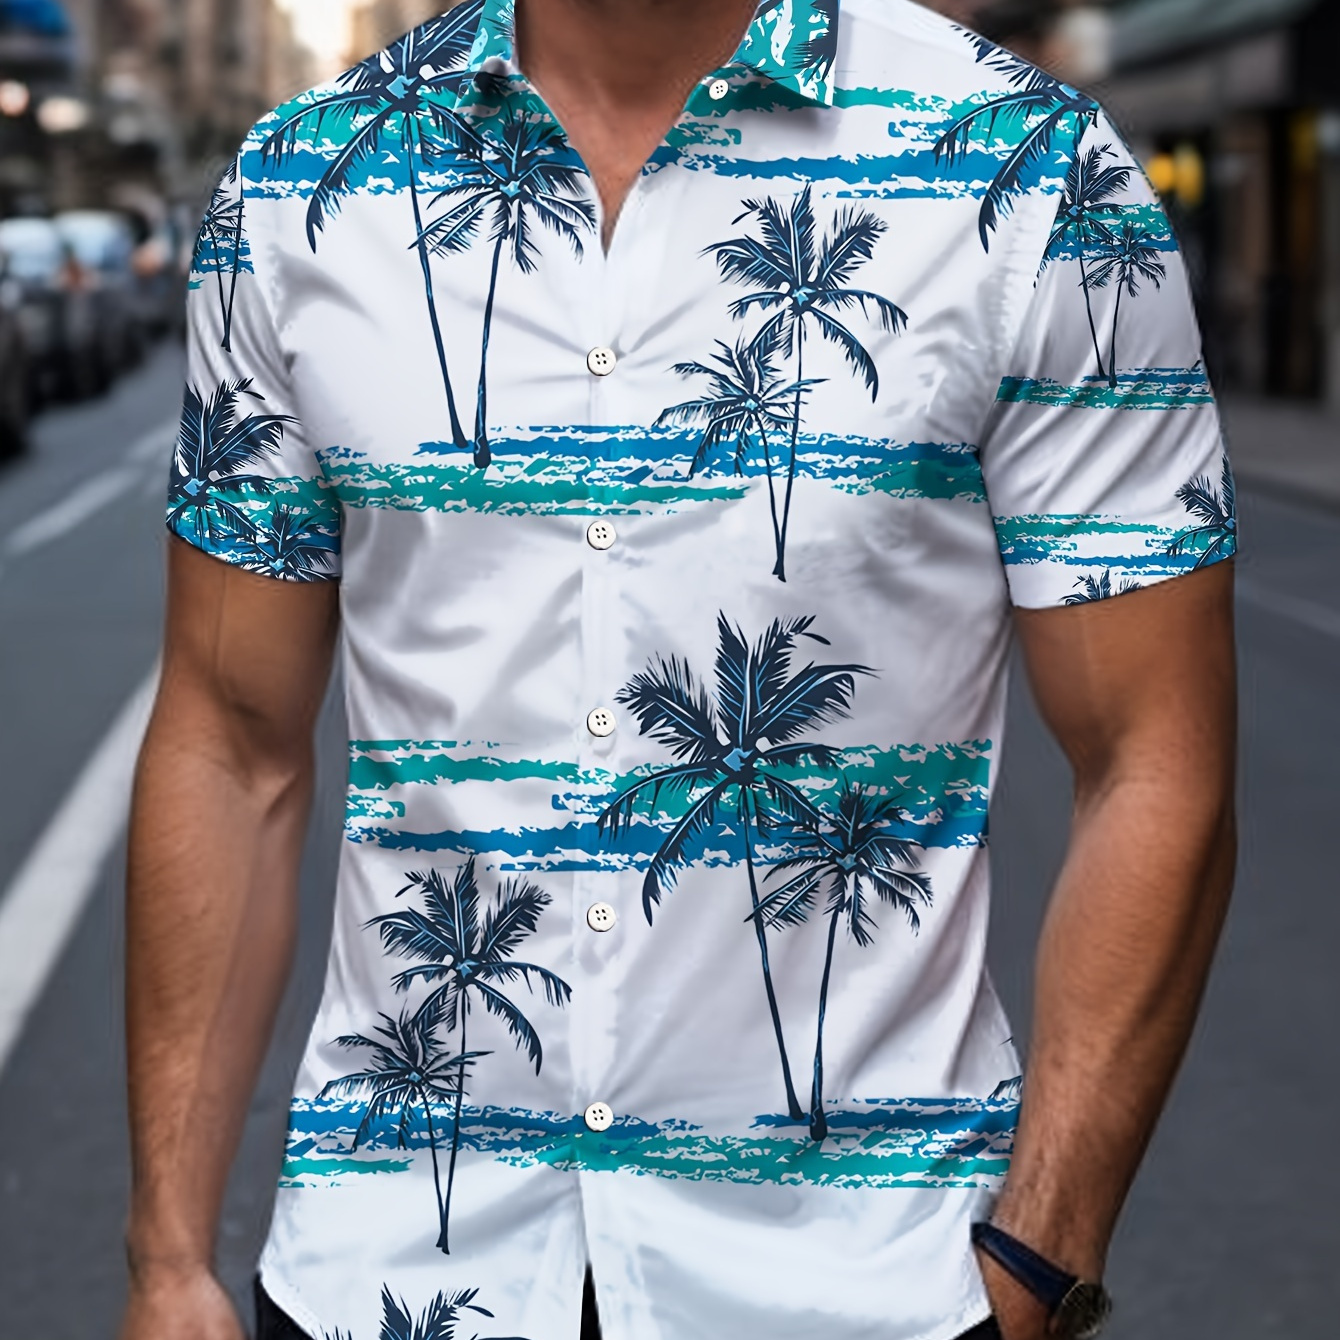 

Men's Trendy Hawaiian Lapel Collar Graphic Shirt With Stylish Palm Tree Print For Summer Vacation And Casual Wear